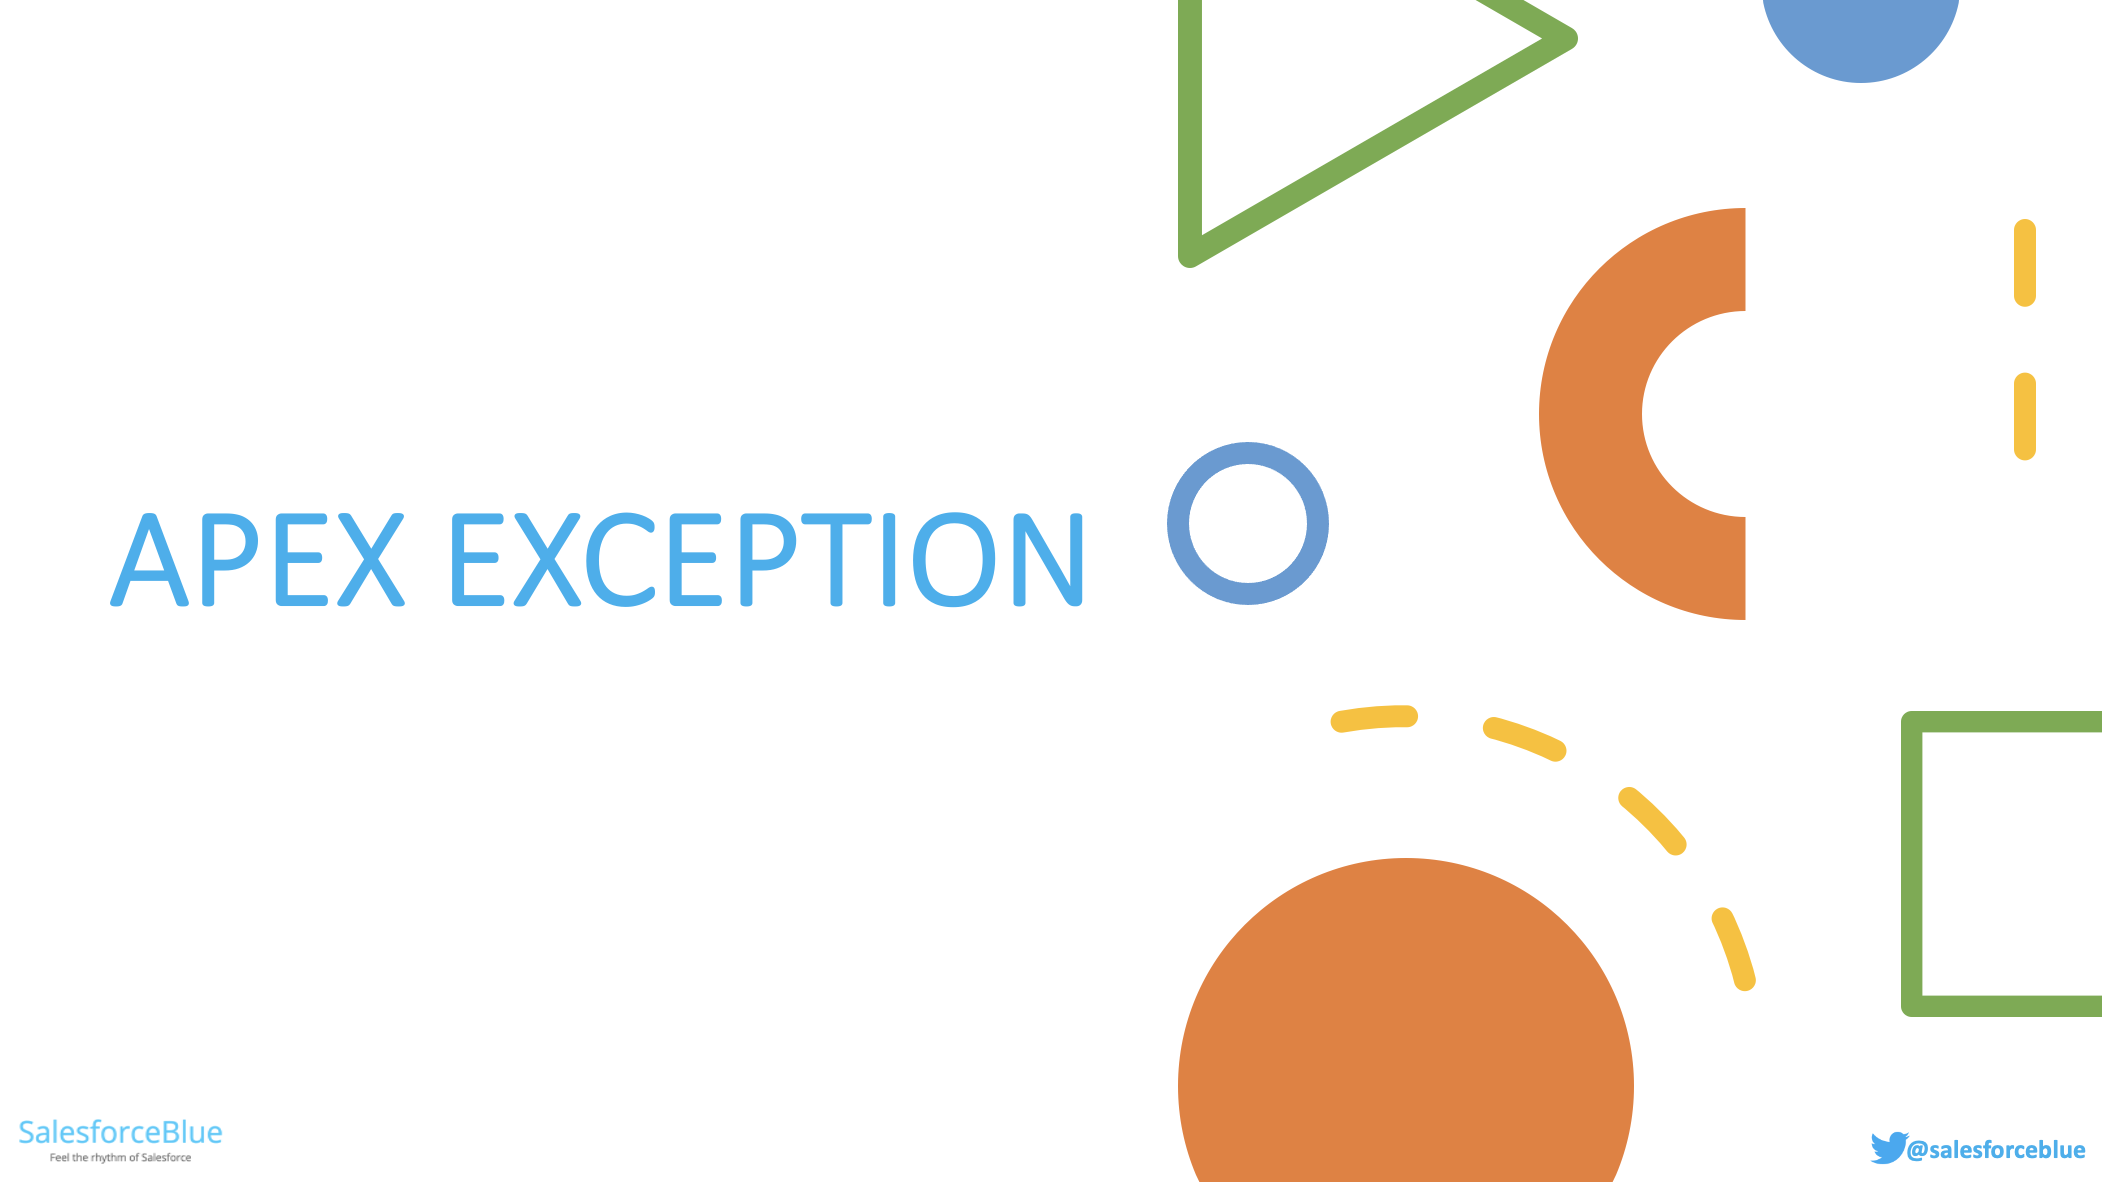 Different types of Exceptions in Salesforce - Apex Hours